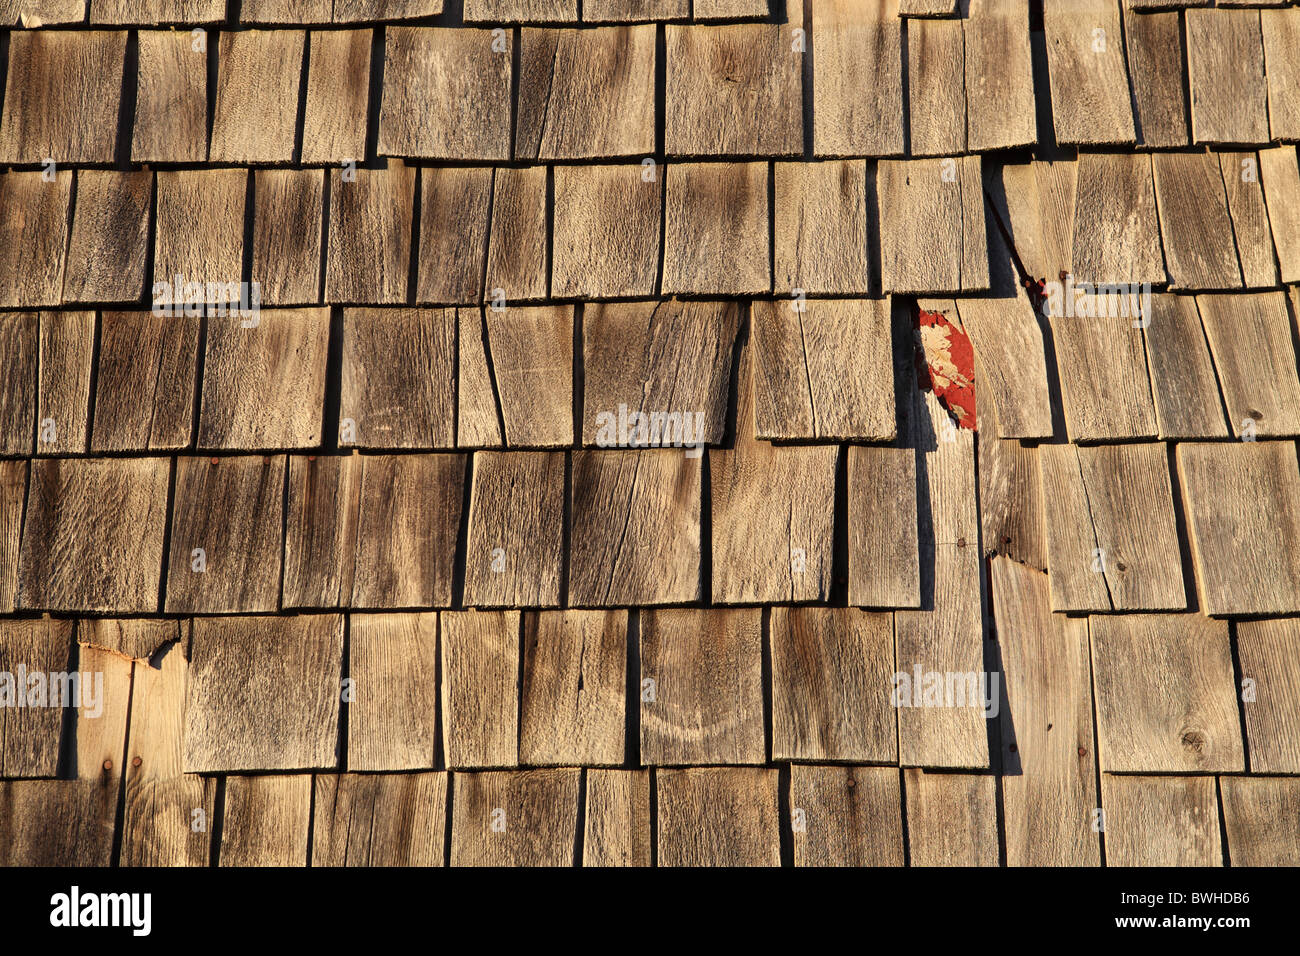 Damaged wooden shingles on a Craigville Beach wooden building, Barnstable, Cape Cod, Massachusetts, USA Stock Photo